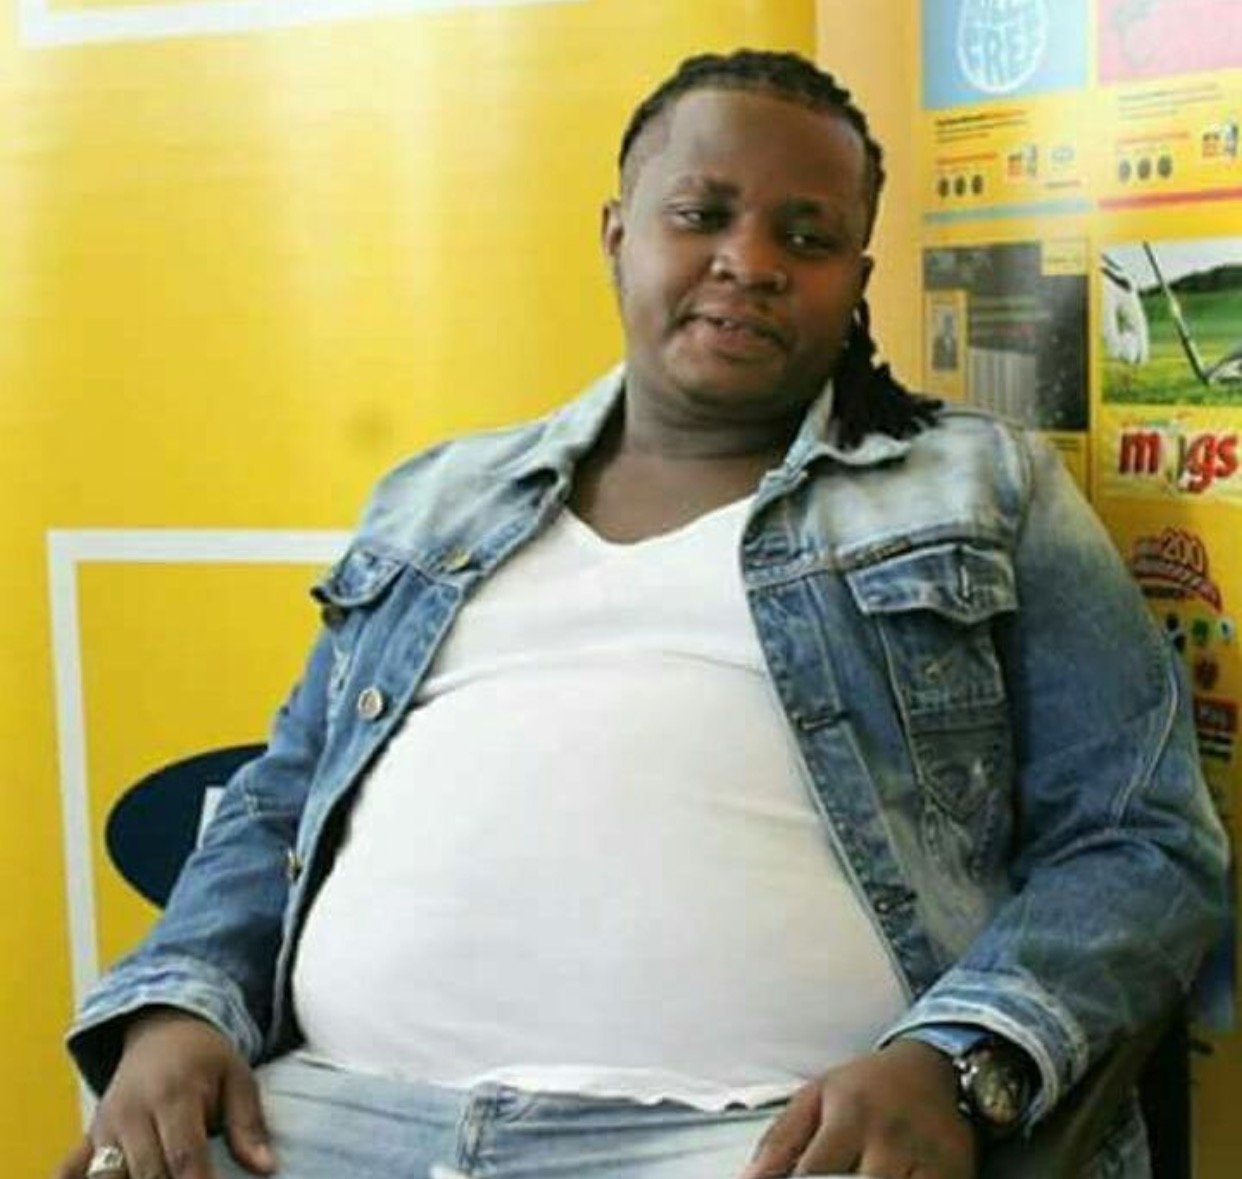 DK Kwenye Beat tells his sad story after years of being fat shamed by fans, this is heartbreaking!